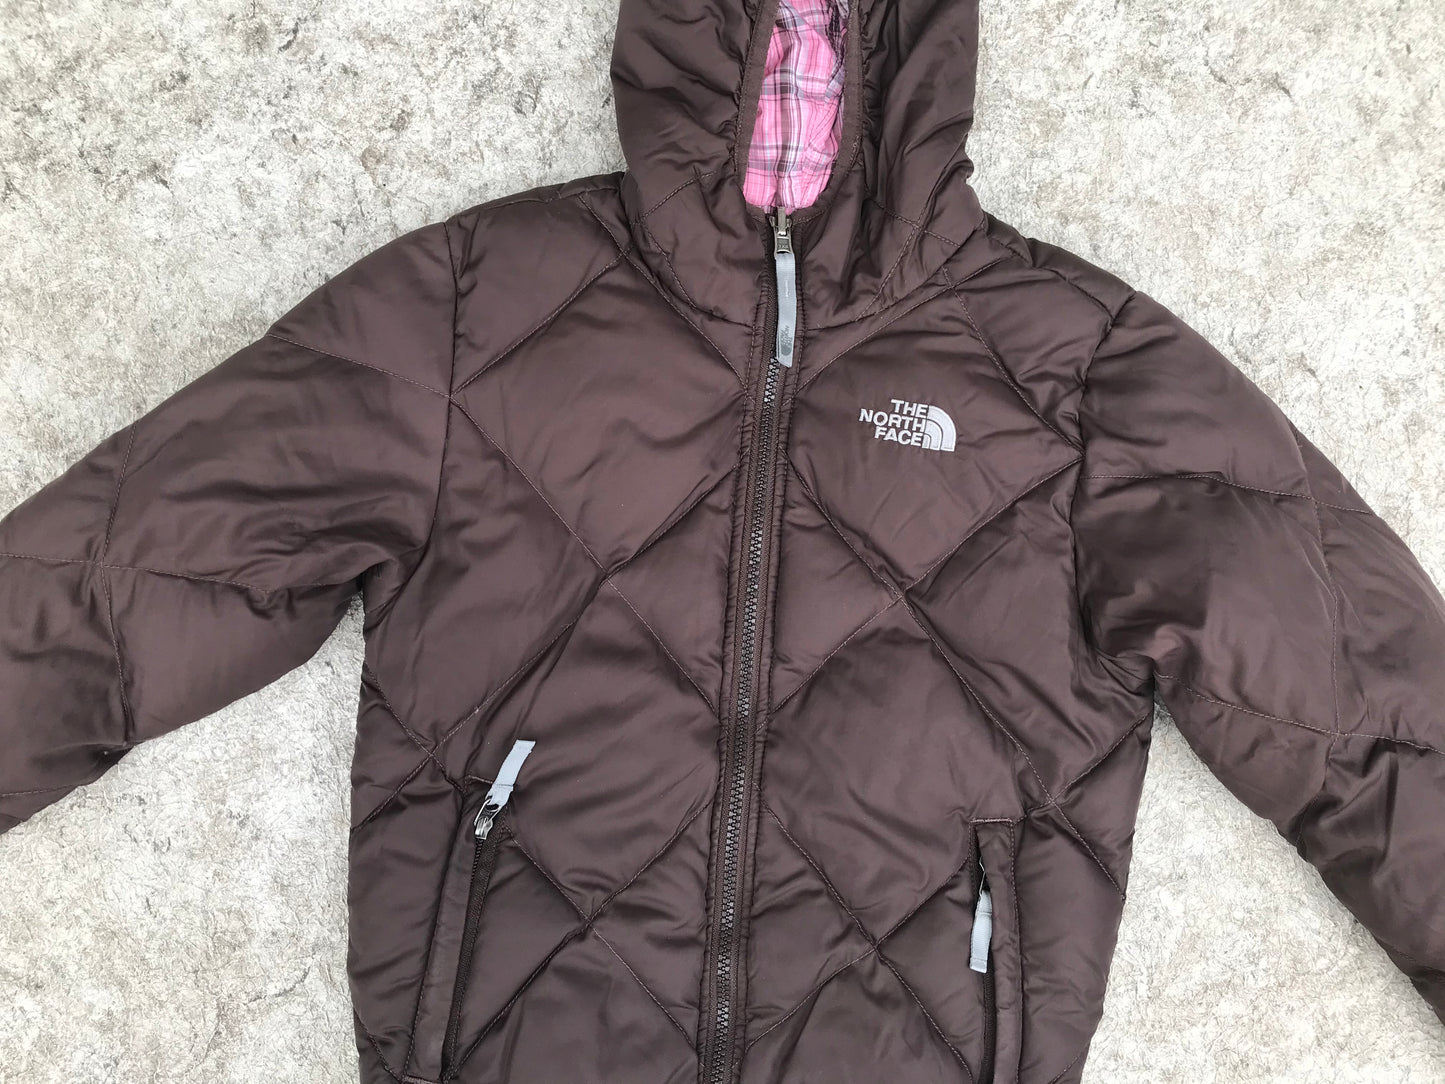 Winter Coat Child Size 7-8 The North Face 550 Goose Down Fill Small Repair Fixed Inside Brown Pink